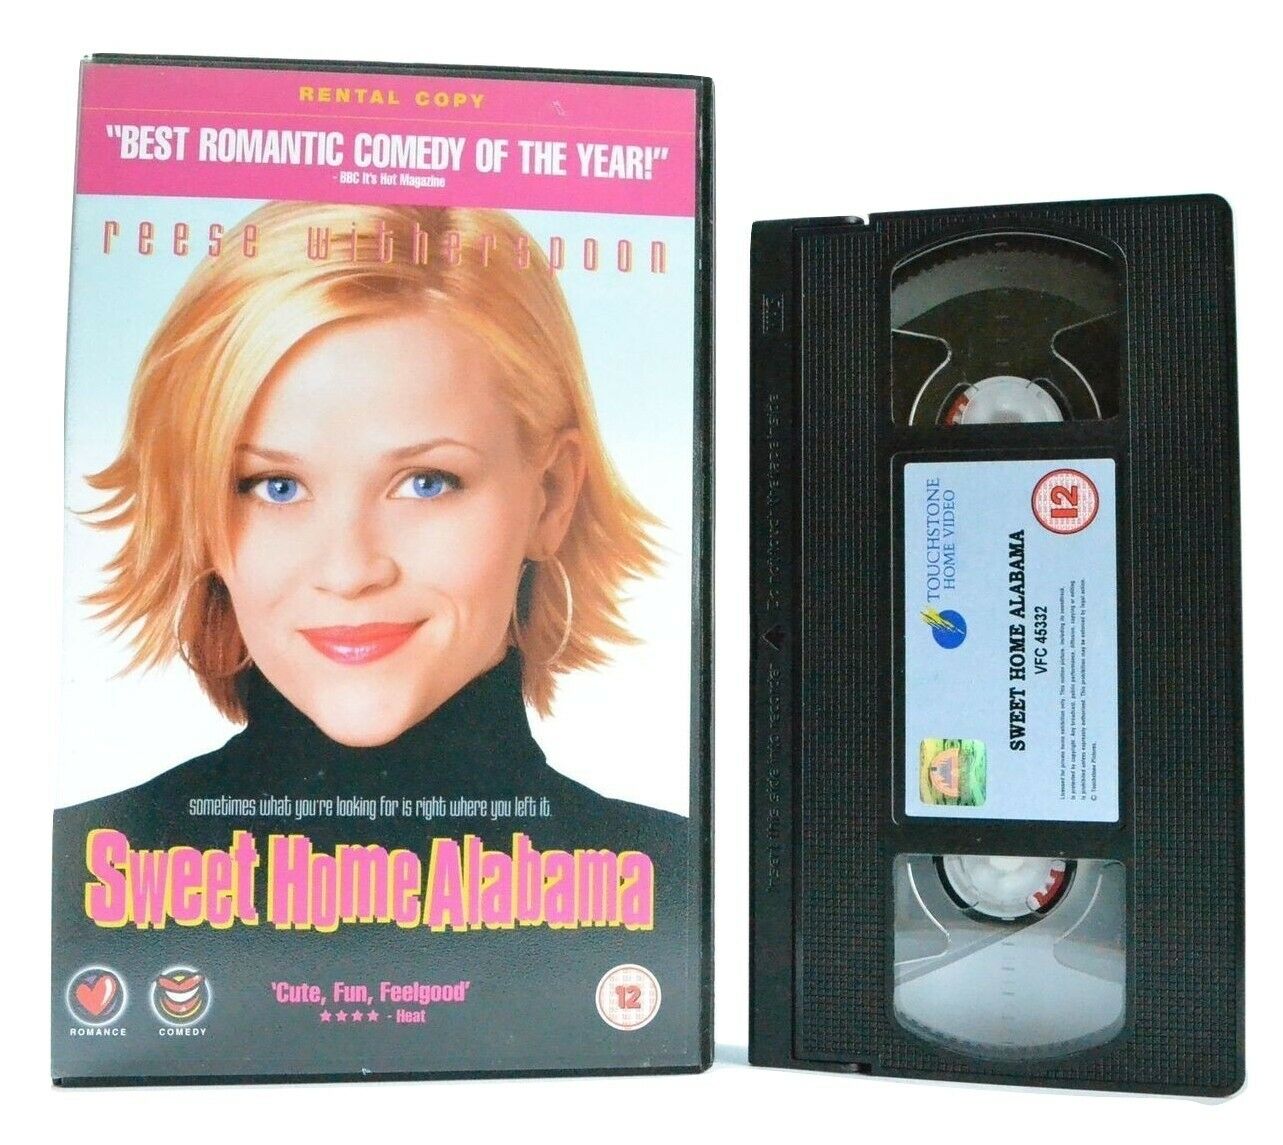 Sweet Home Alabama: Fairy Tale Romance - Large Box - Reese Witherspoon - Pal VHS-